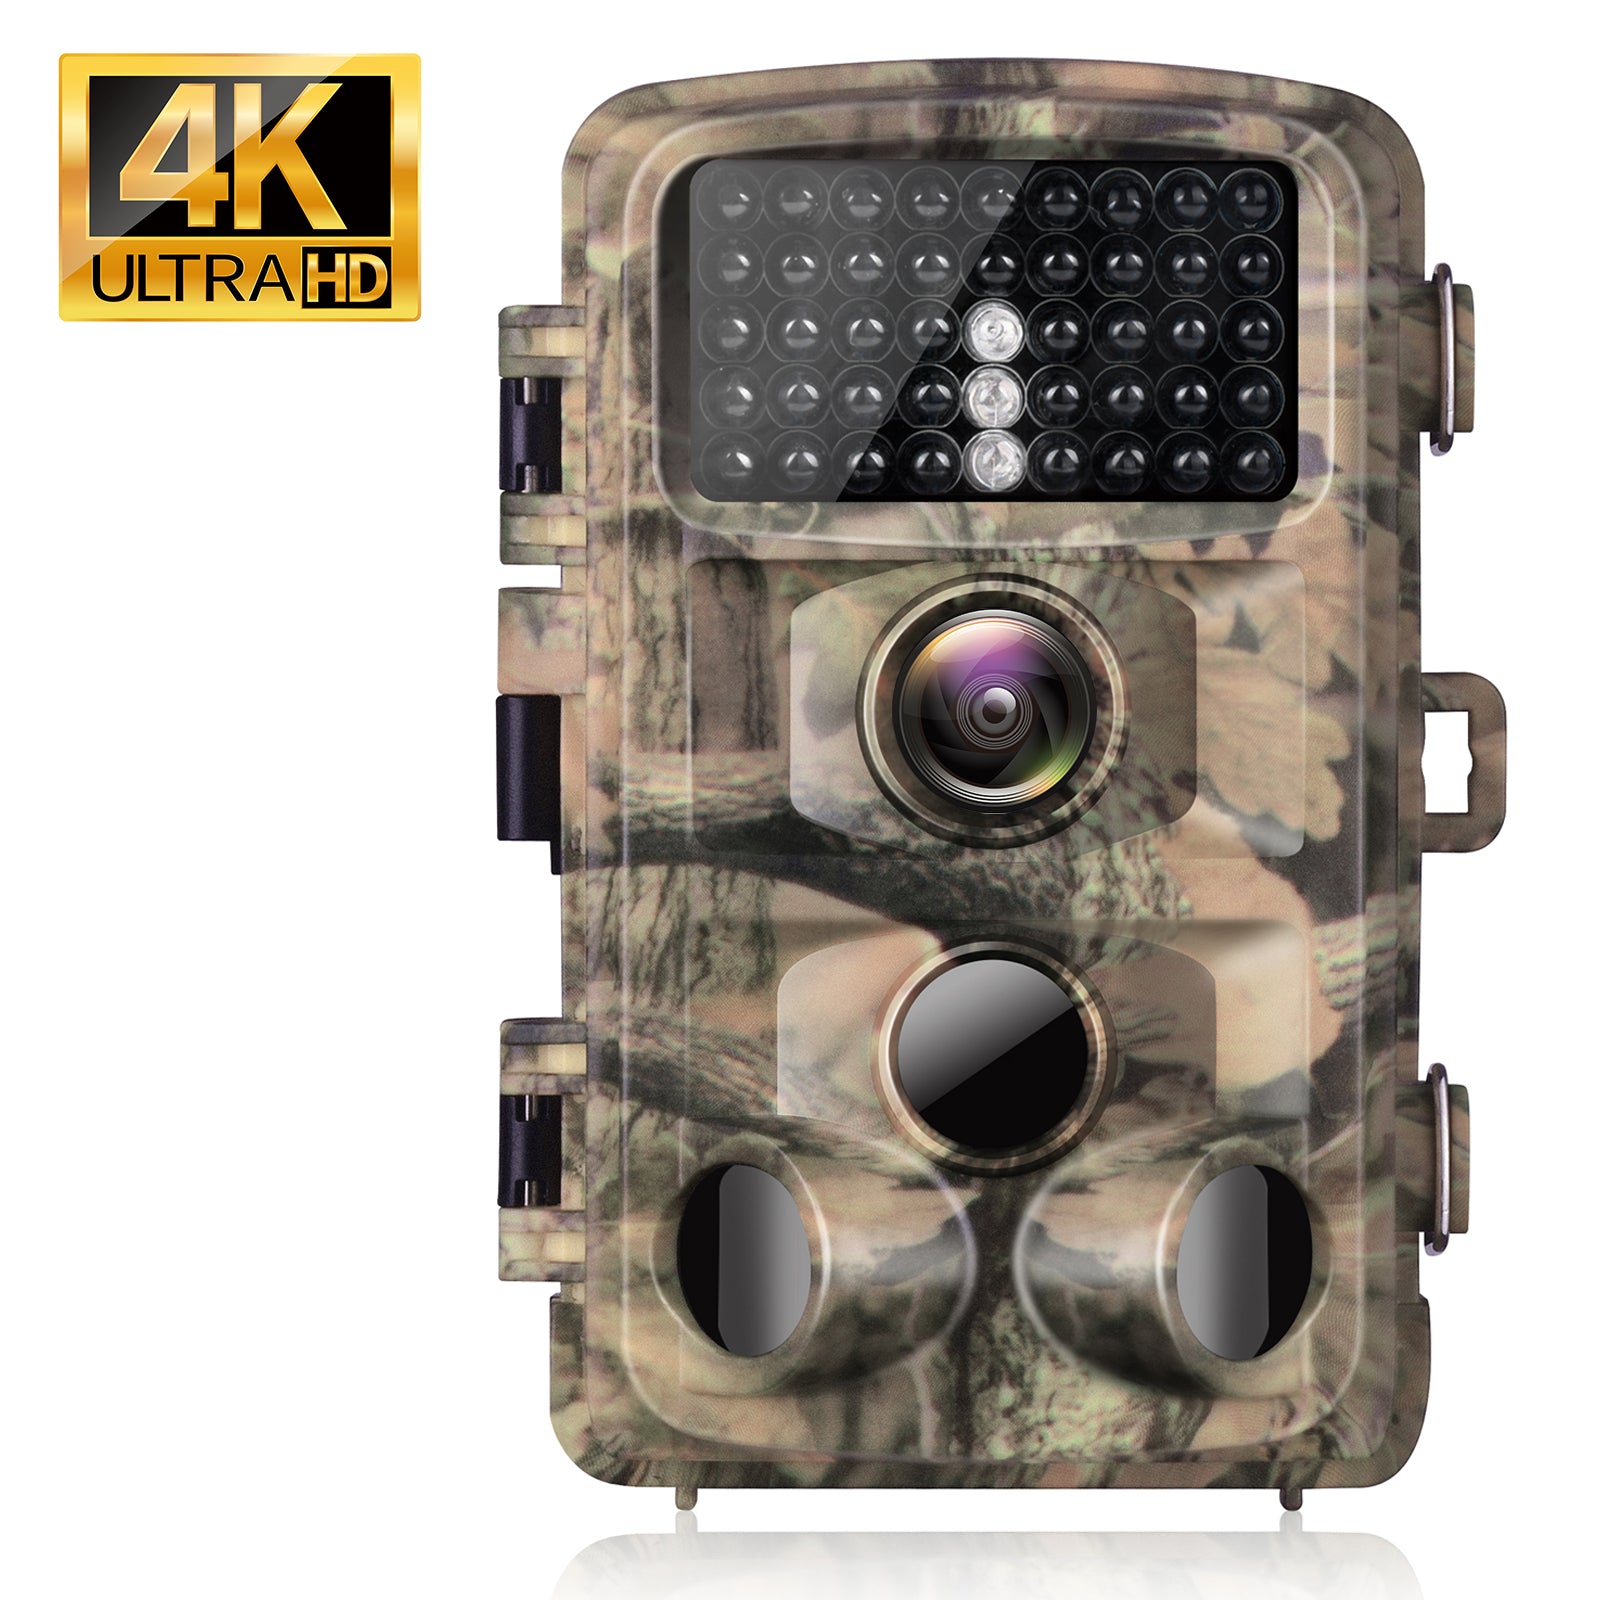 Campark T45A Upgrade Waterproof Trail Camera 20MP 4K Hunting Game Camera (Only available in the US)